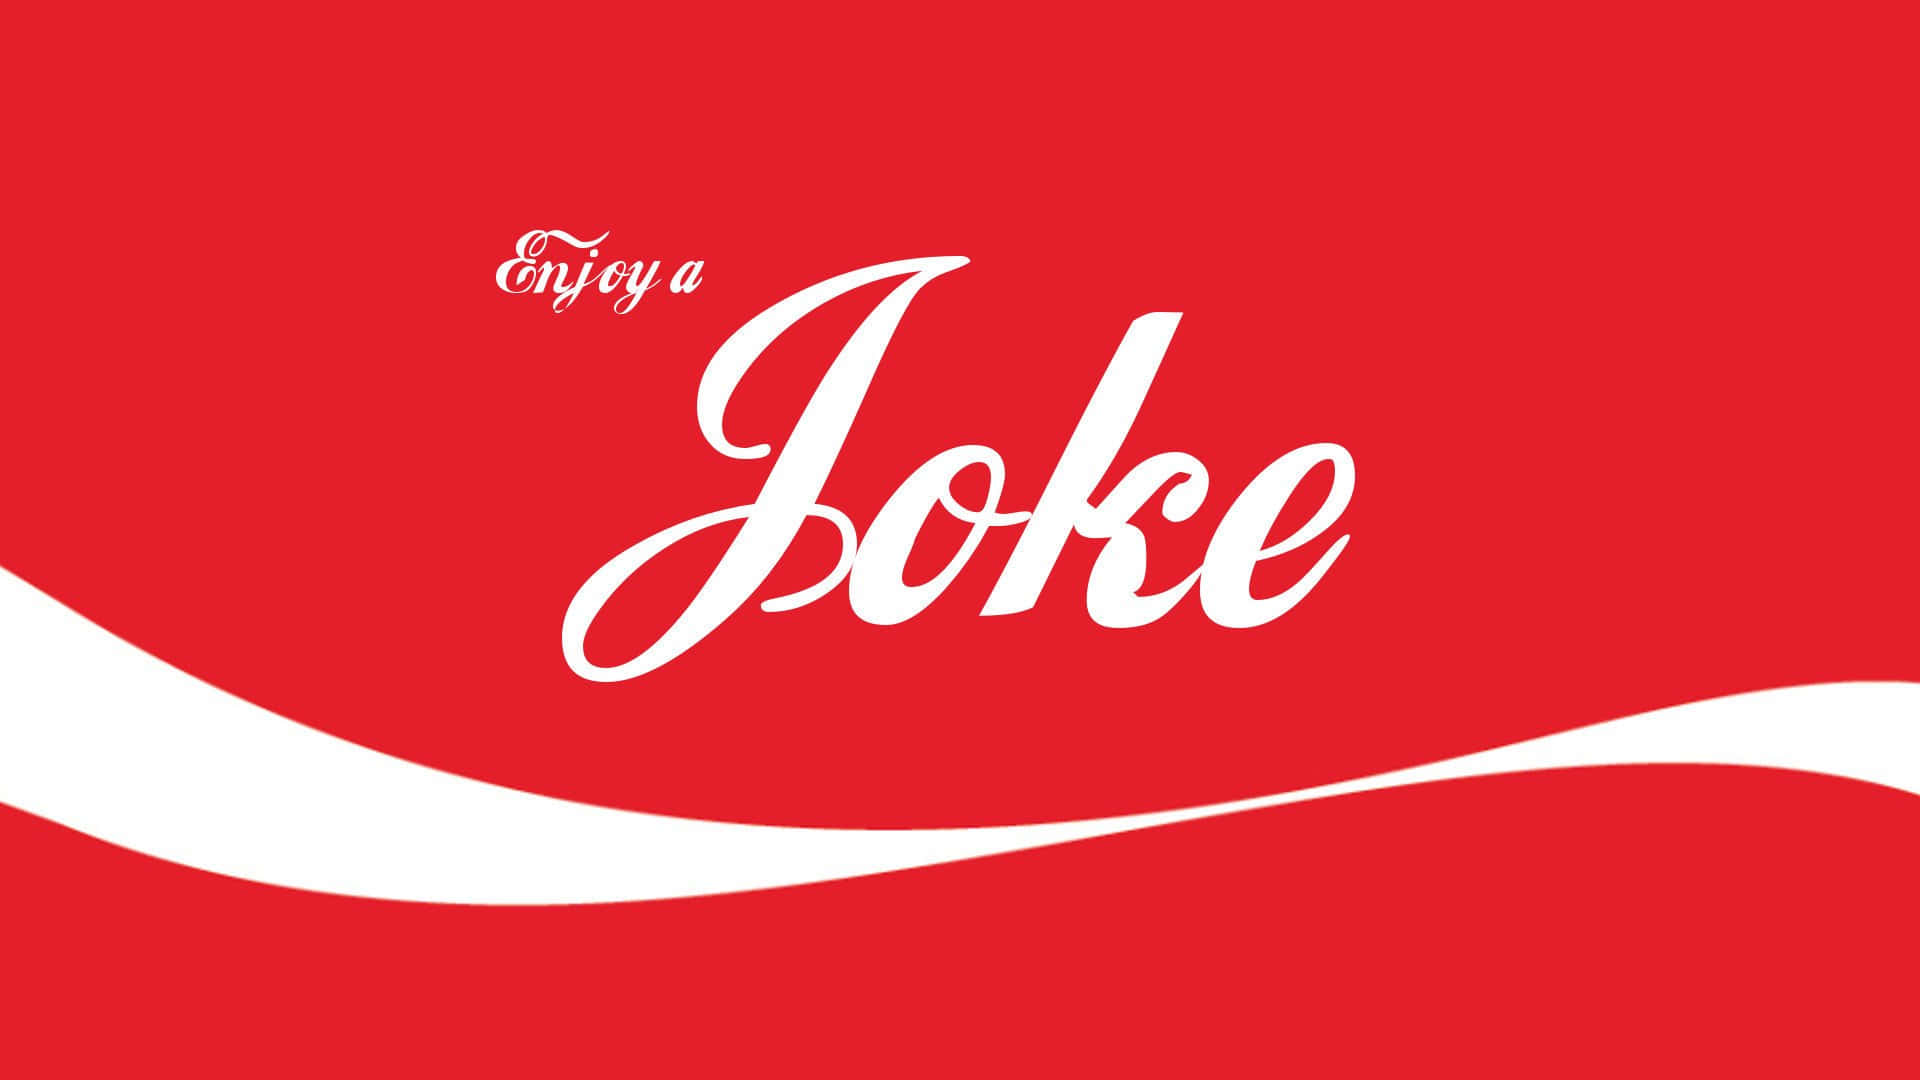 A Coca Cola Logo With The Word Joke On It Wallpaper